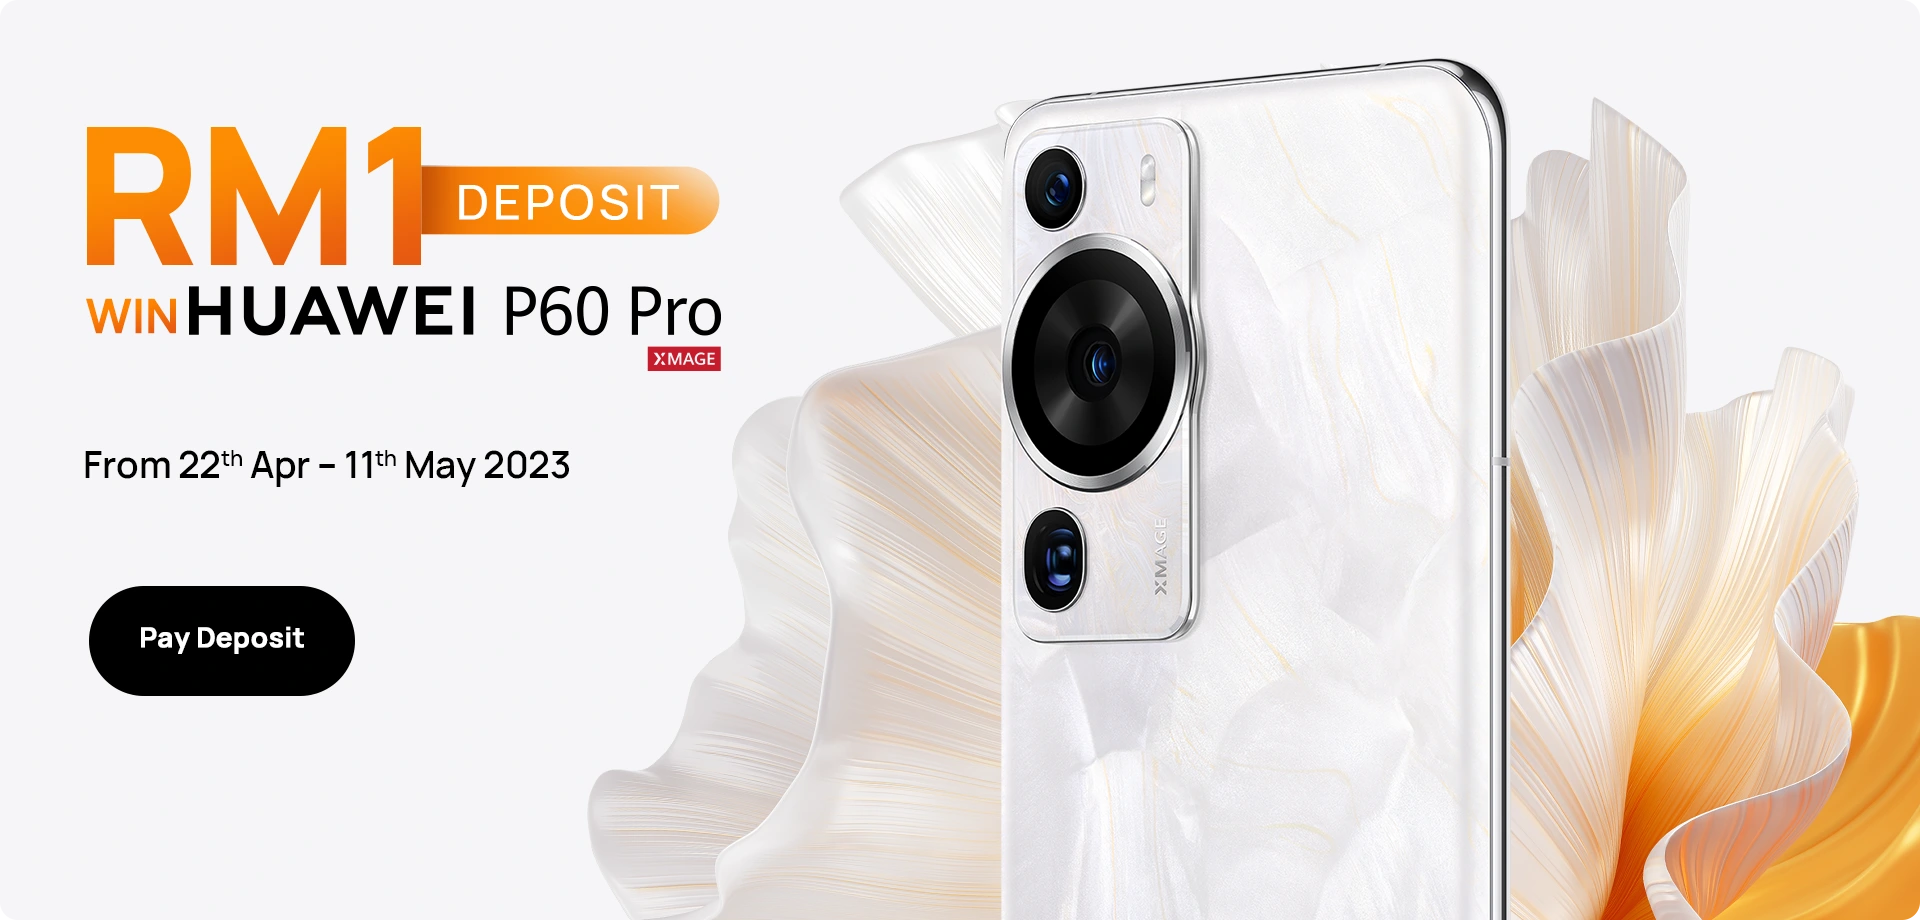 HUAWEI P60 Pro Set To Launch In Malaysia On 11th May 2023 7